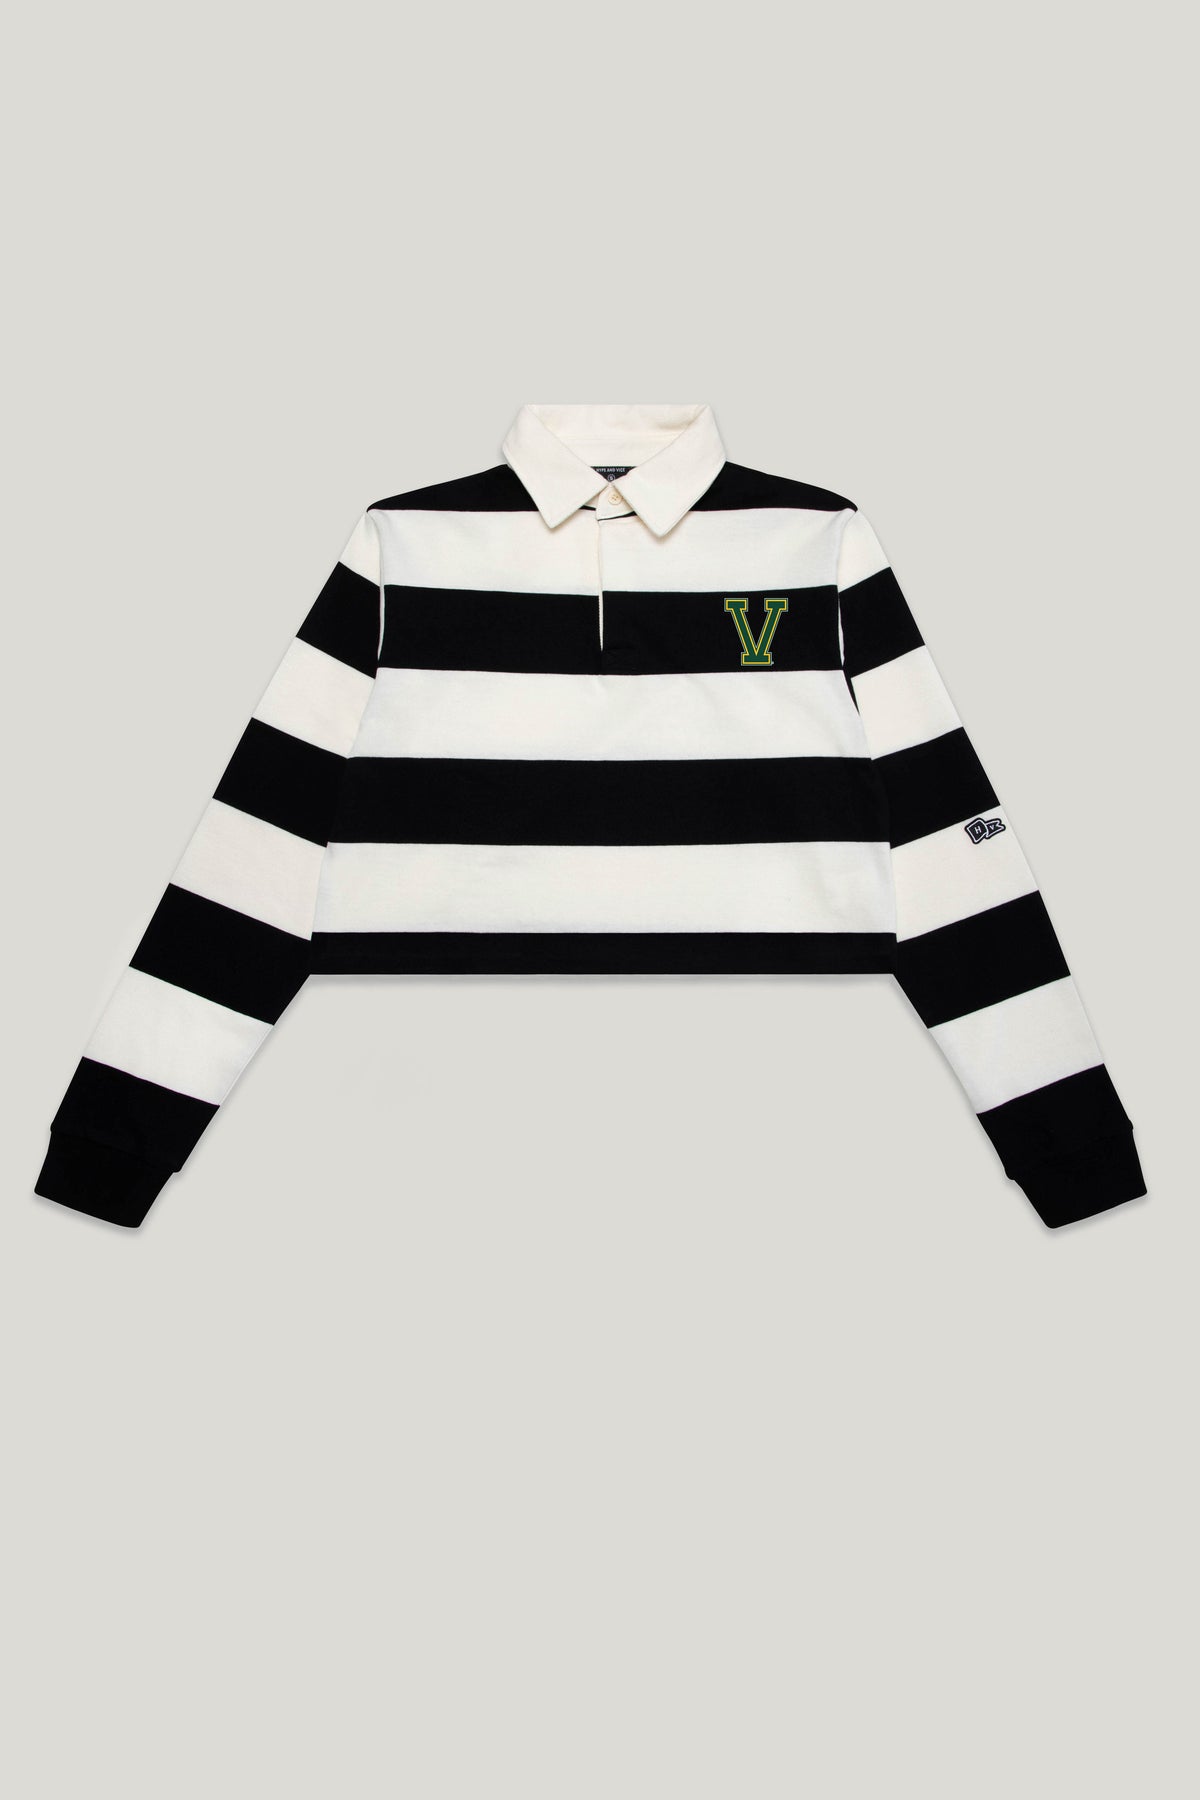 University of Vermont Rugby Top